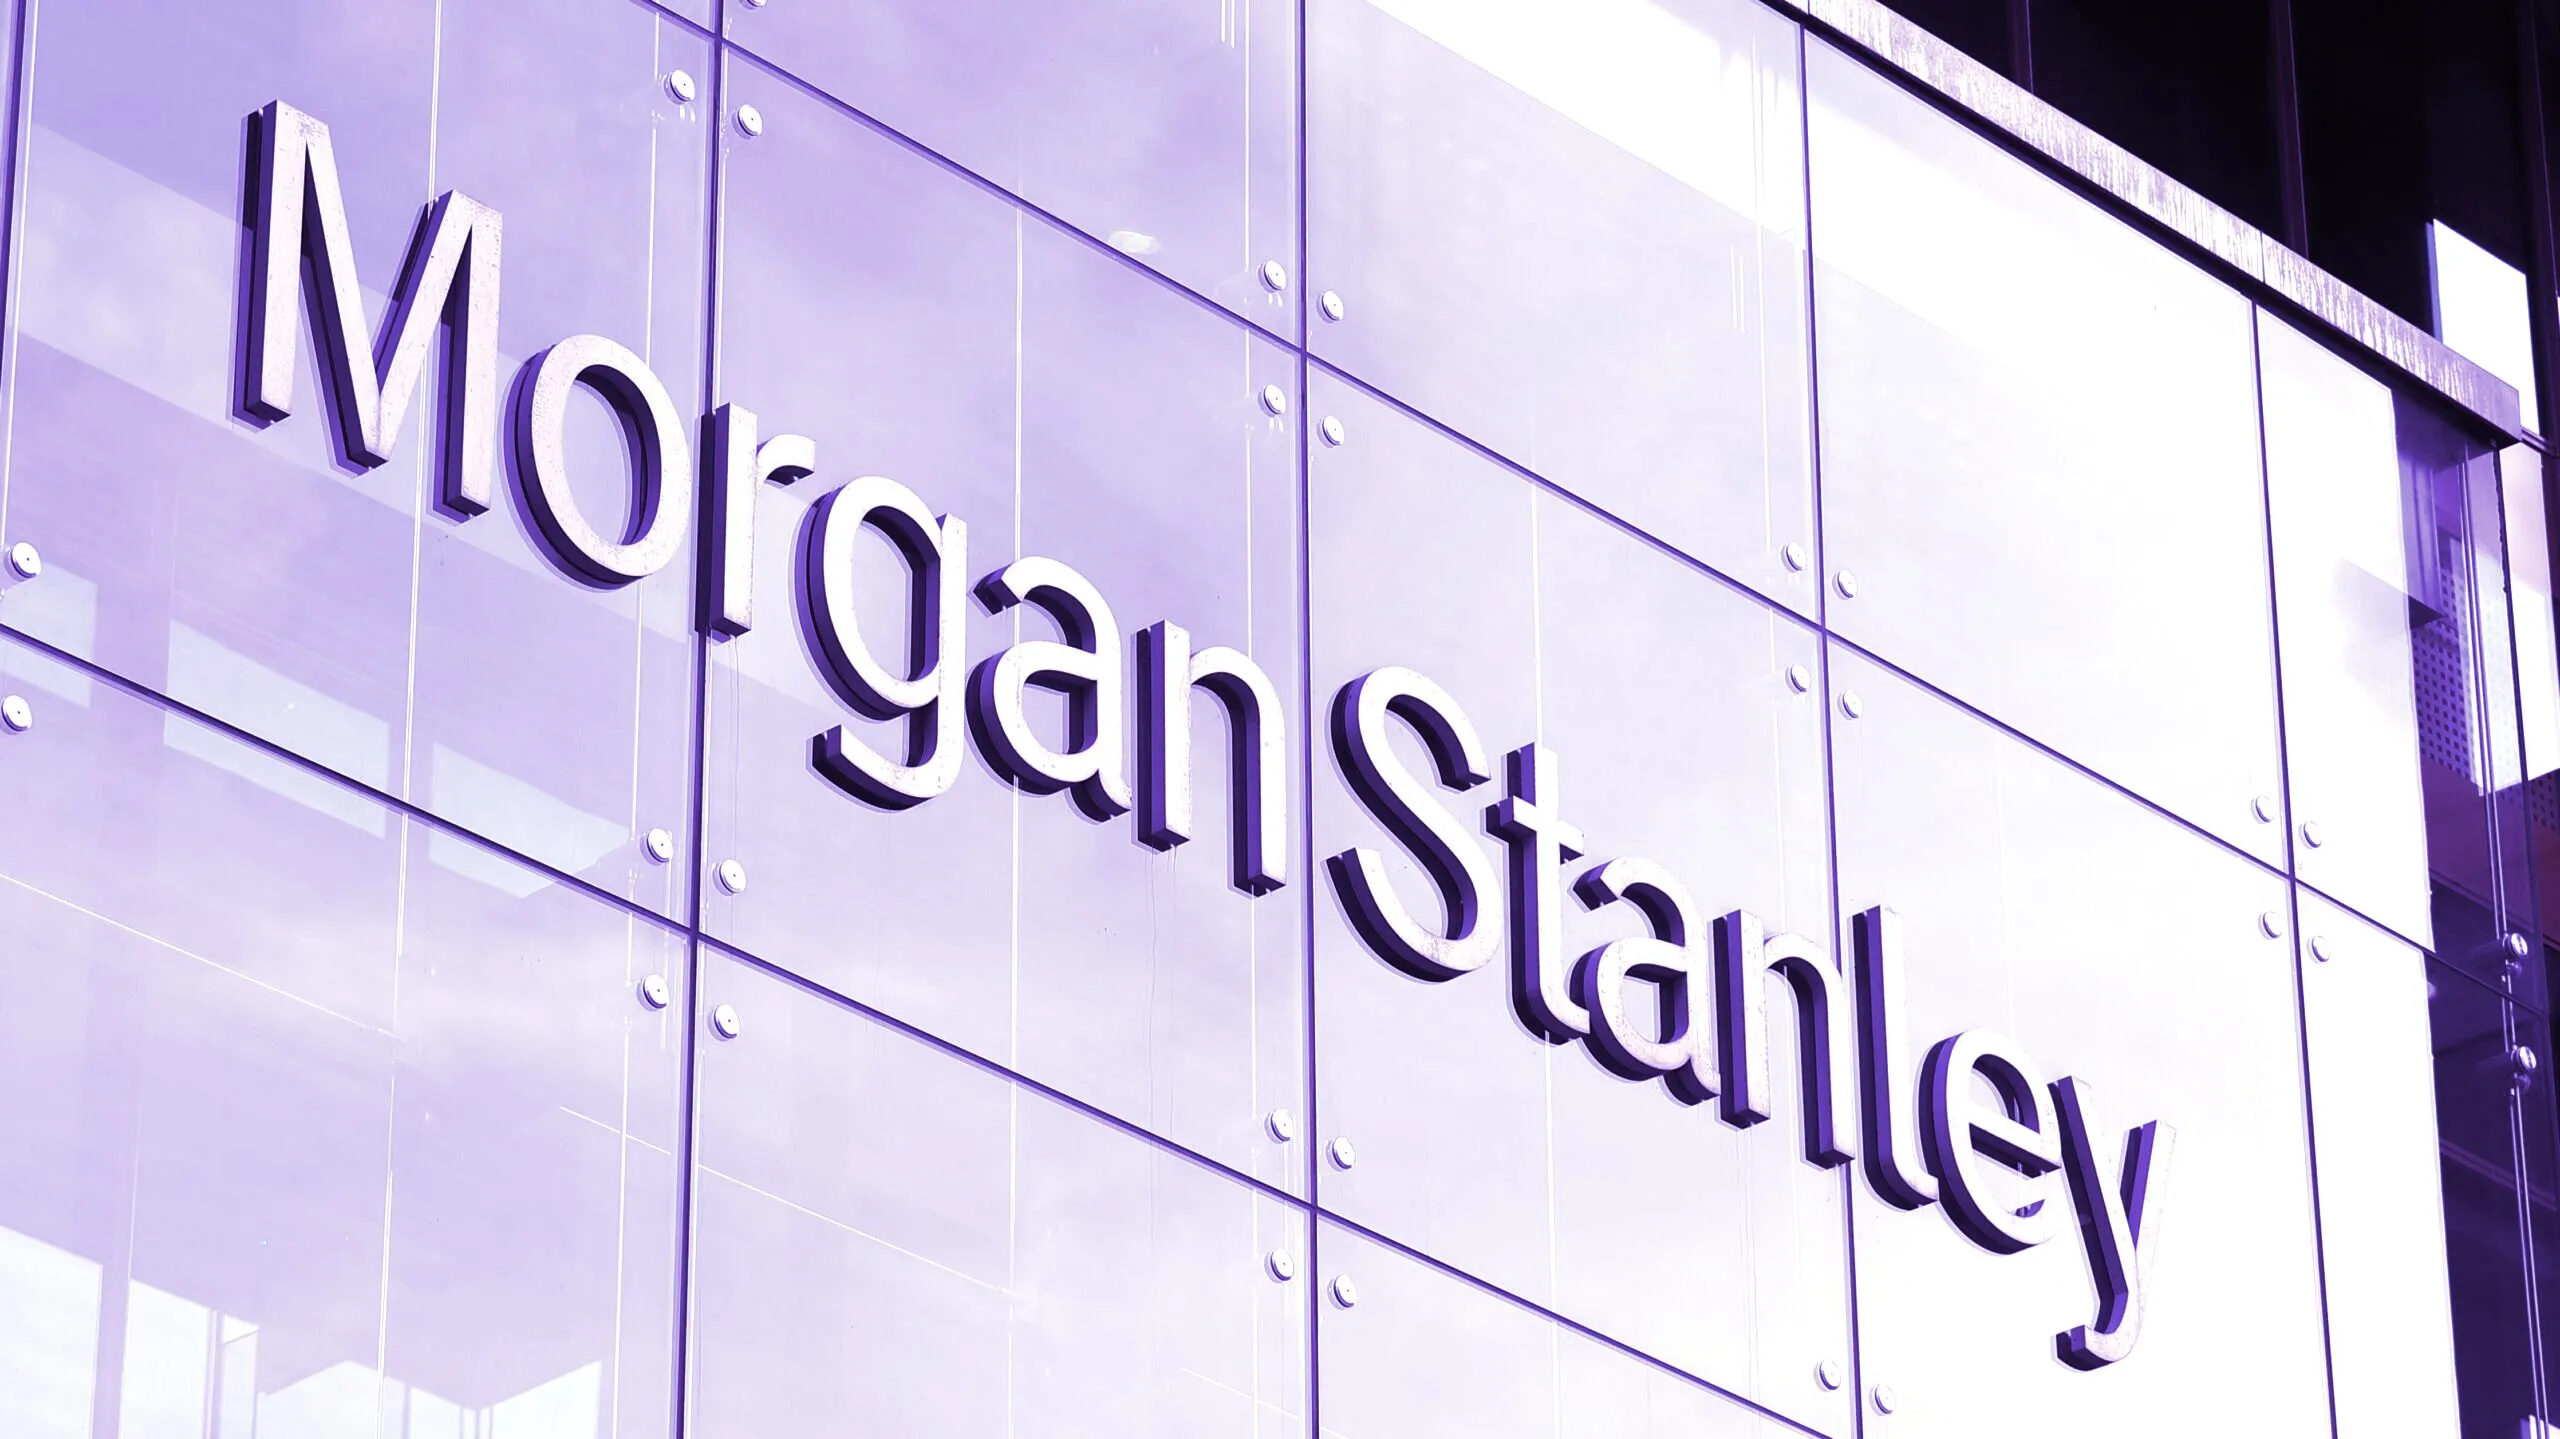 Morgan Stanley is one of the biggest financial institutions in the world. Image: Shutterstock